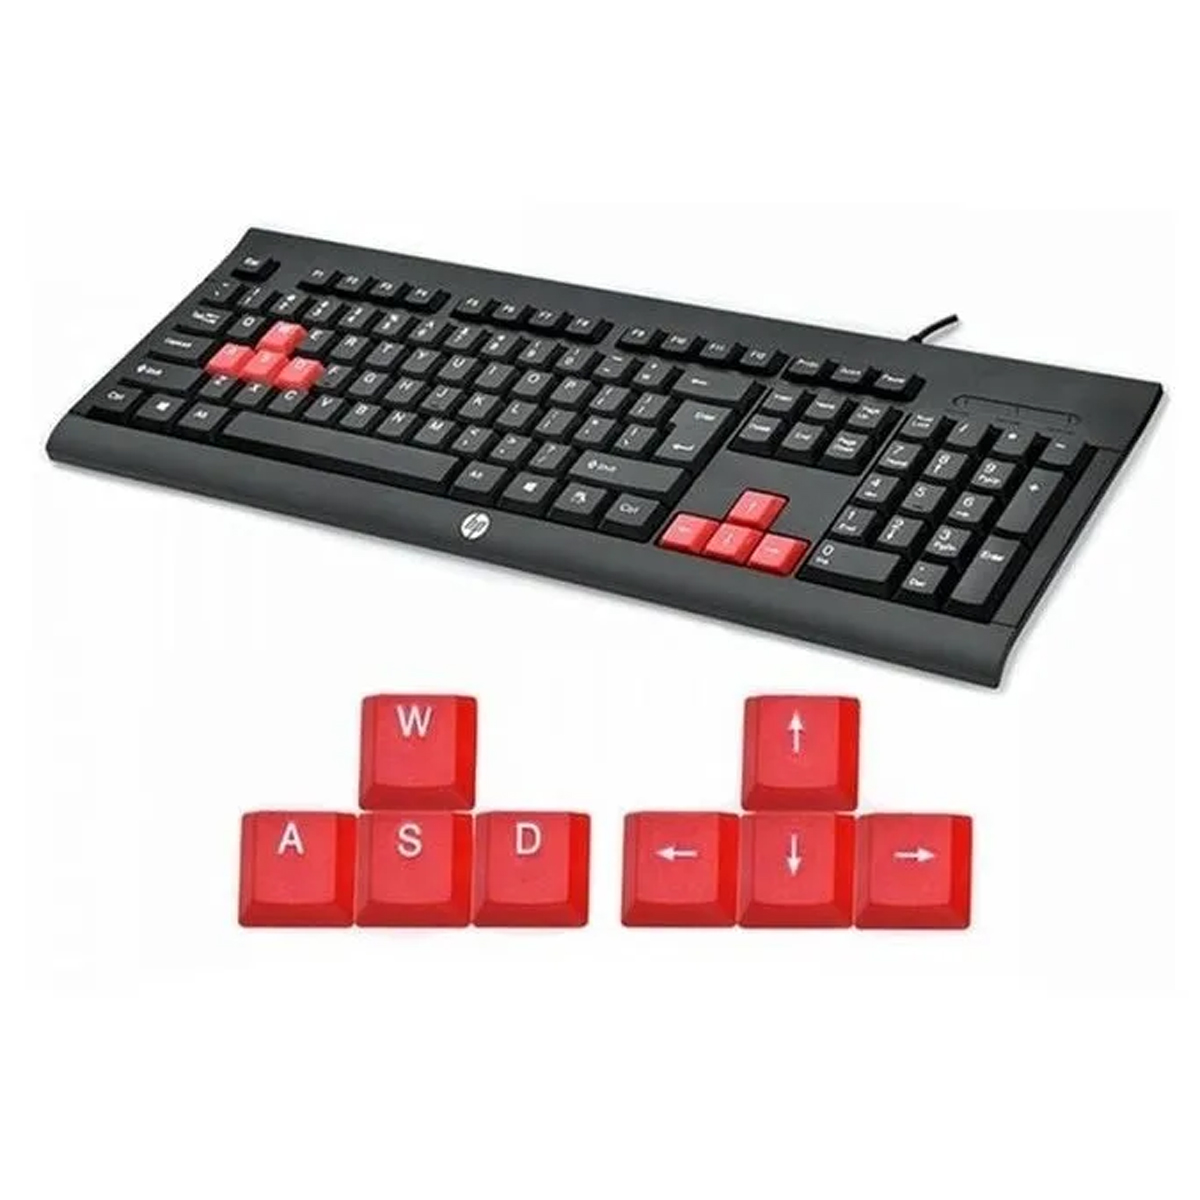 627511-OUT HP GAMER                                                     | COMBO GAMER HP KM100 TECLADO+MOUSE CABLEADO SPA NEGRO OUTLET                                                                                                                                                                                              